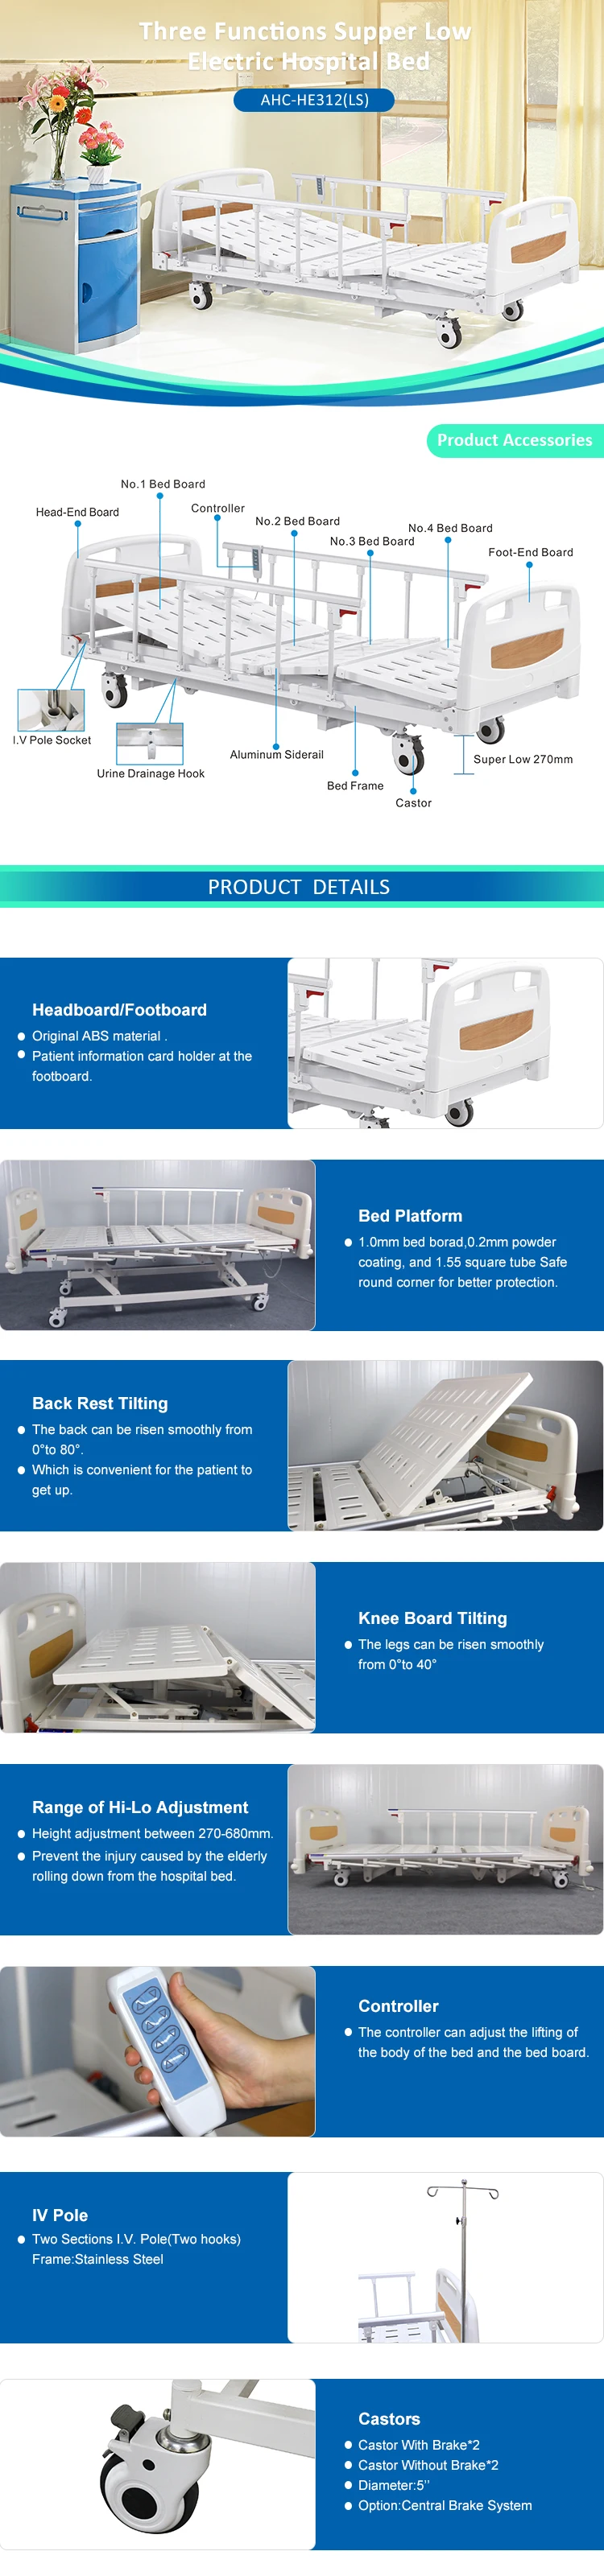 electric 3 functions hospital bed